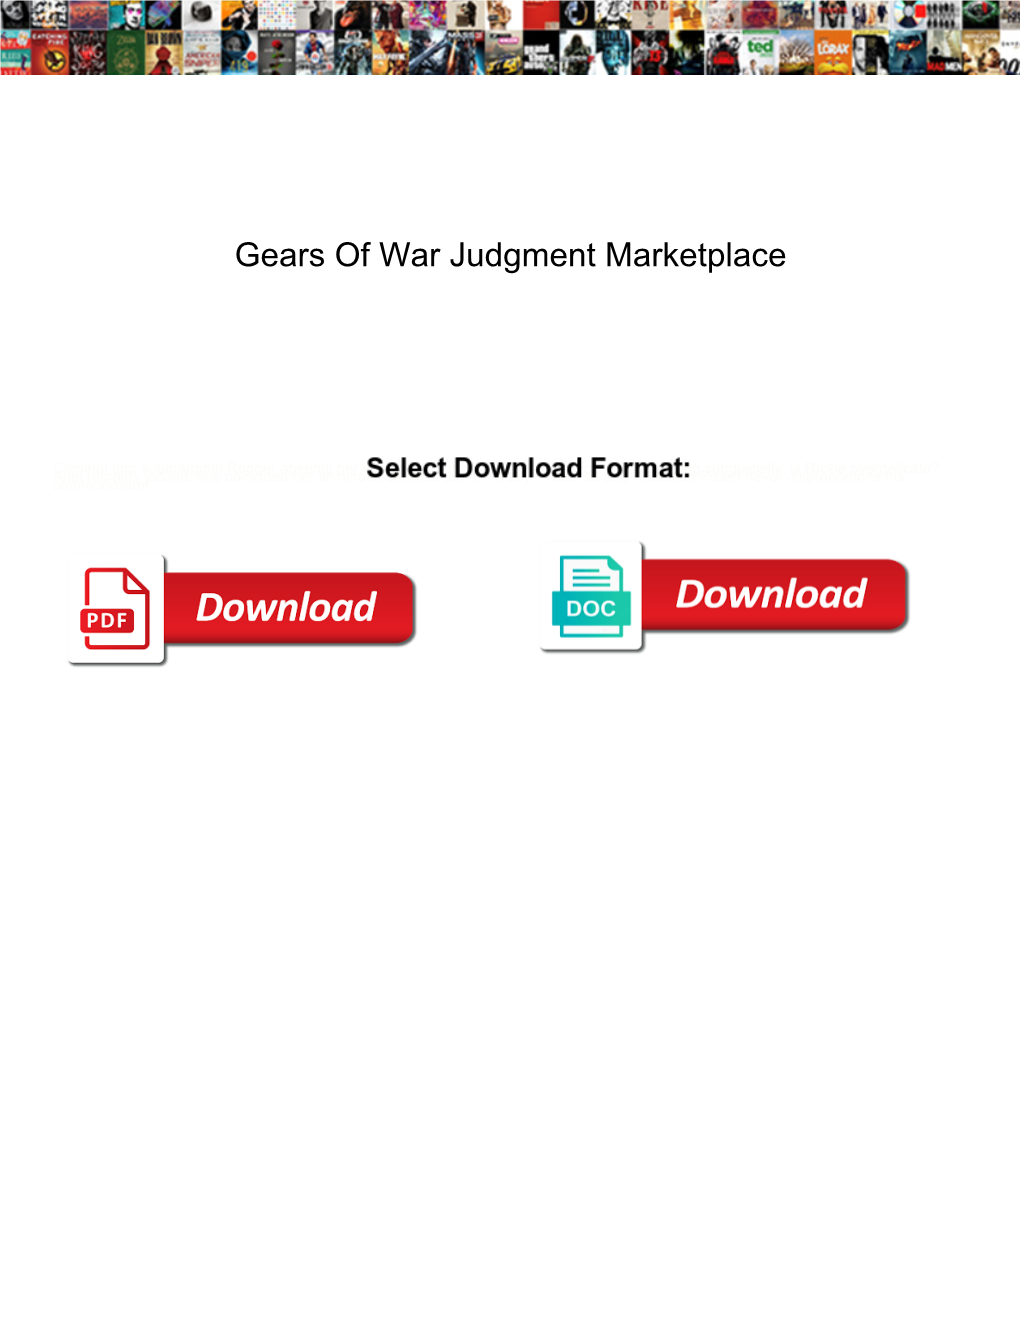 Gears of War Judgment Marketplace